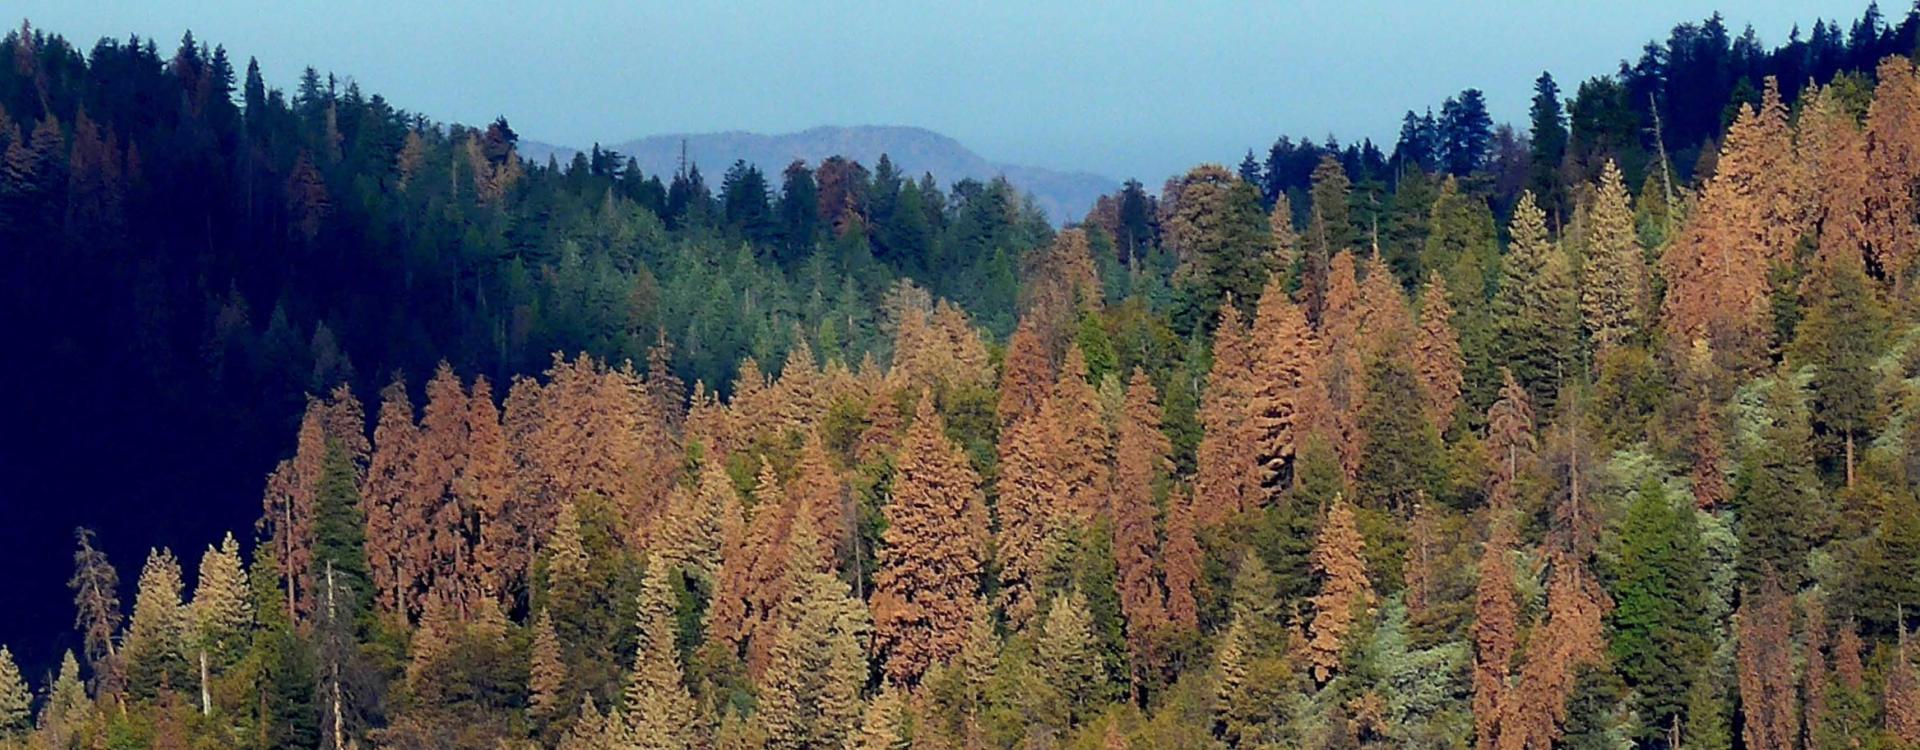 View of forest with fall colors